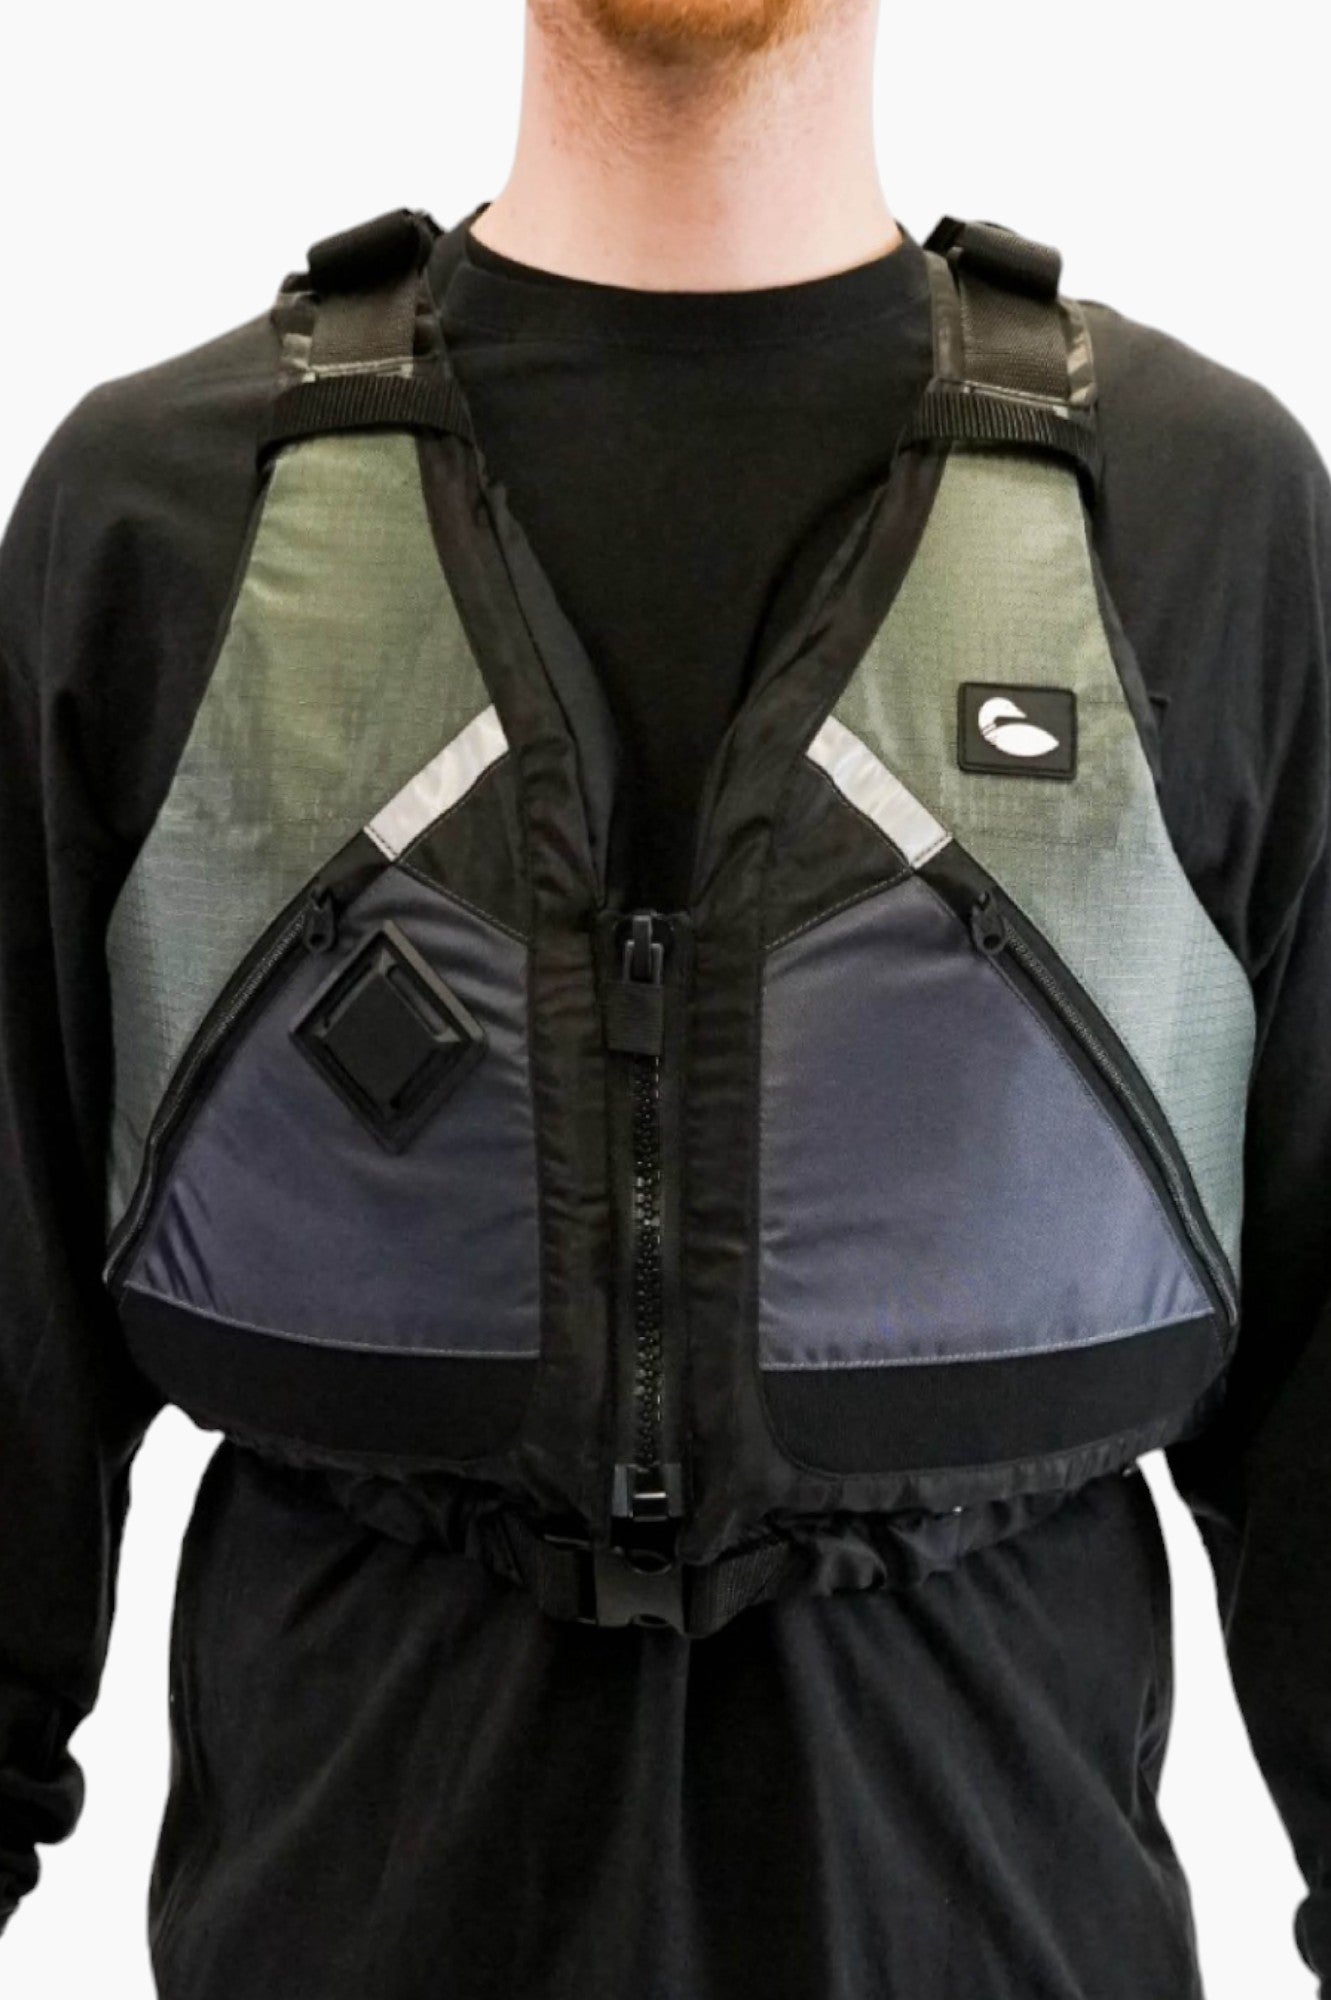 Person wearing a green and grey life vest with black zippers.